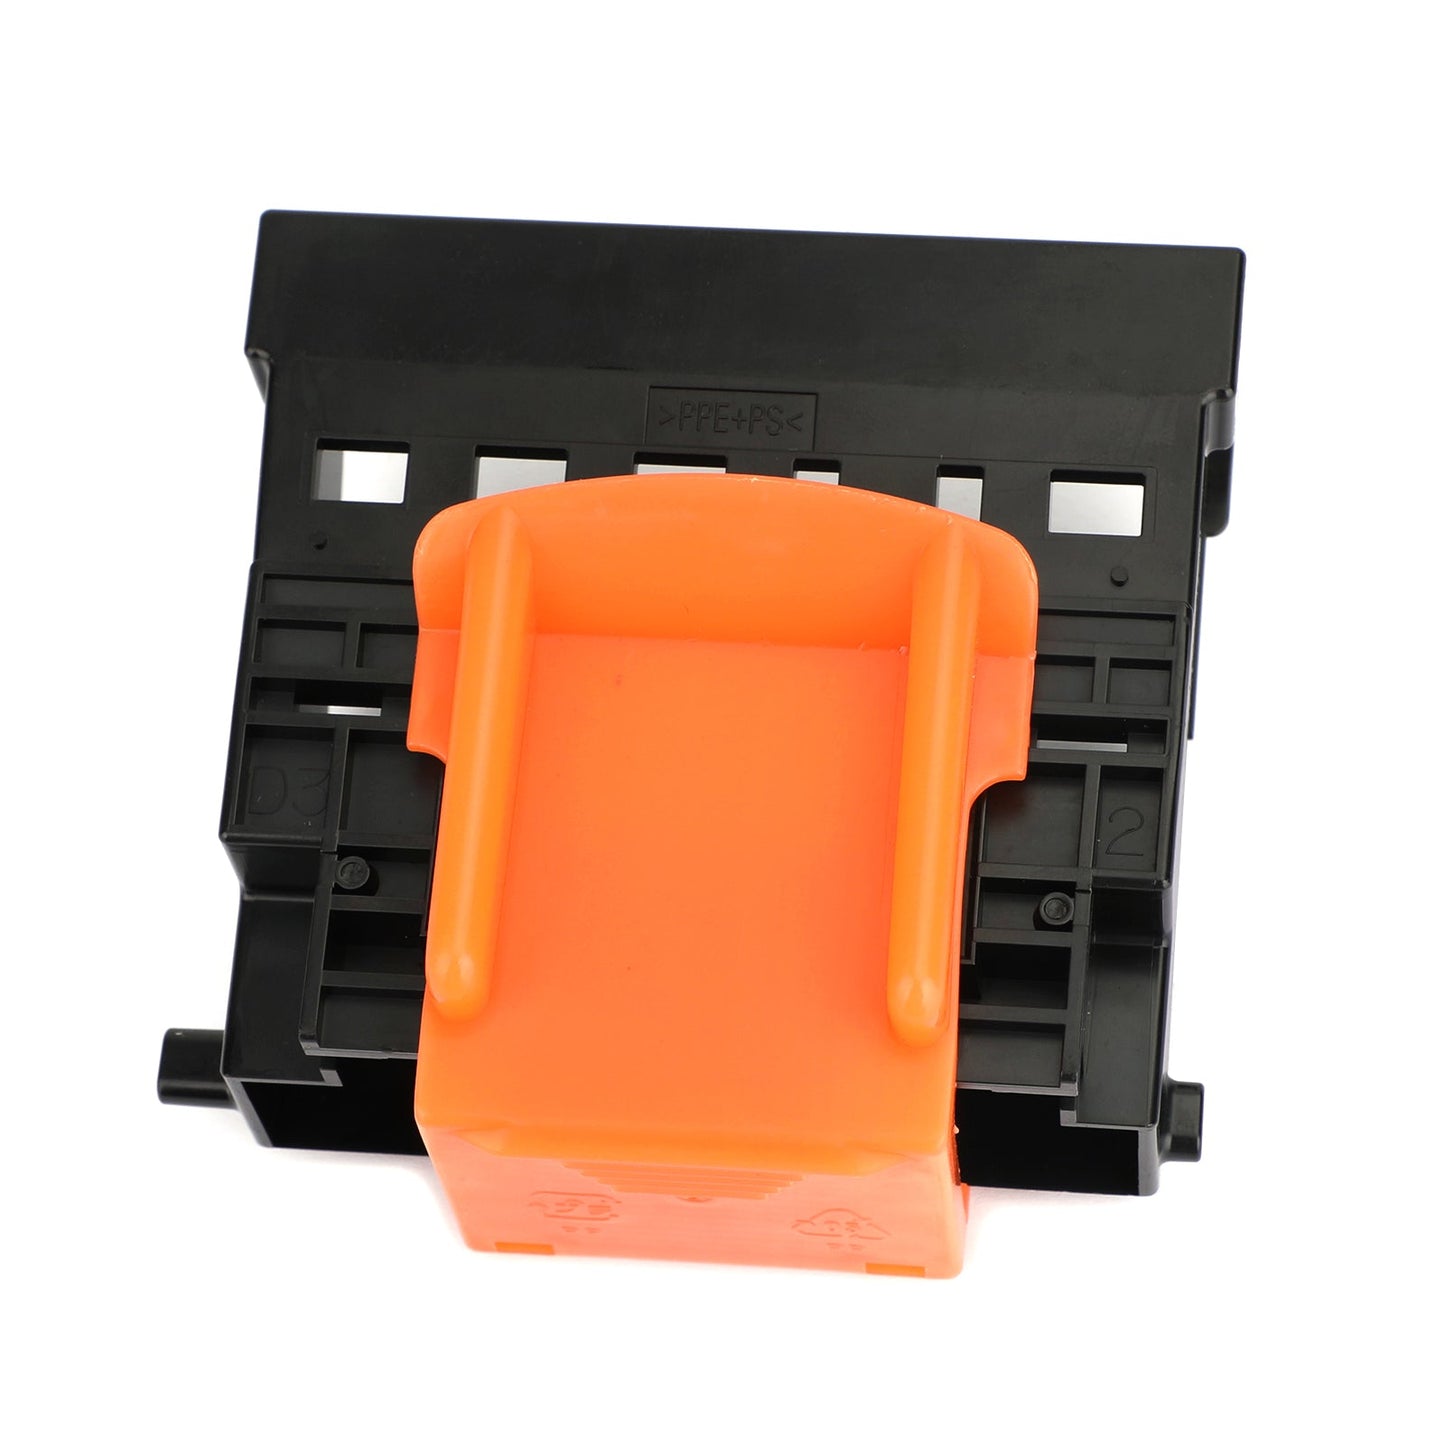 Replacement Printer Print Head QY6-0049 For I865 IP4000 MP760 MP780 IP4100,Full Color QY6-0049 Printhead Printer Head for IP4000 IP4100 IP4000R IP4100R,Reufrbished Printer Print Head for MP770 MP790 PIXMA MP750 MP760 MP780 QY6-0049